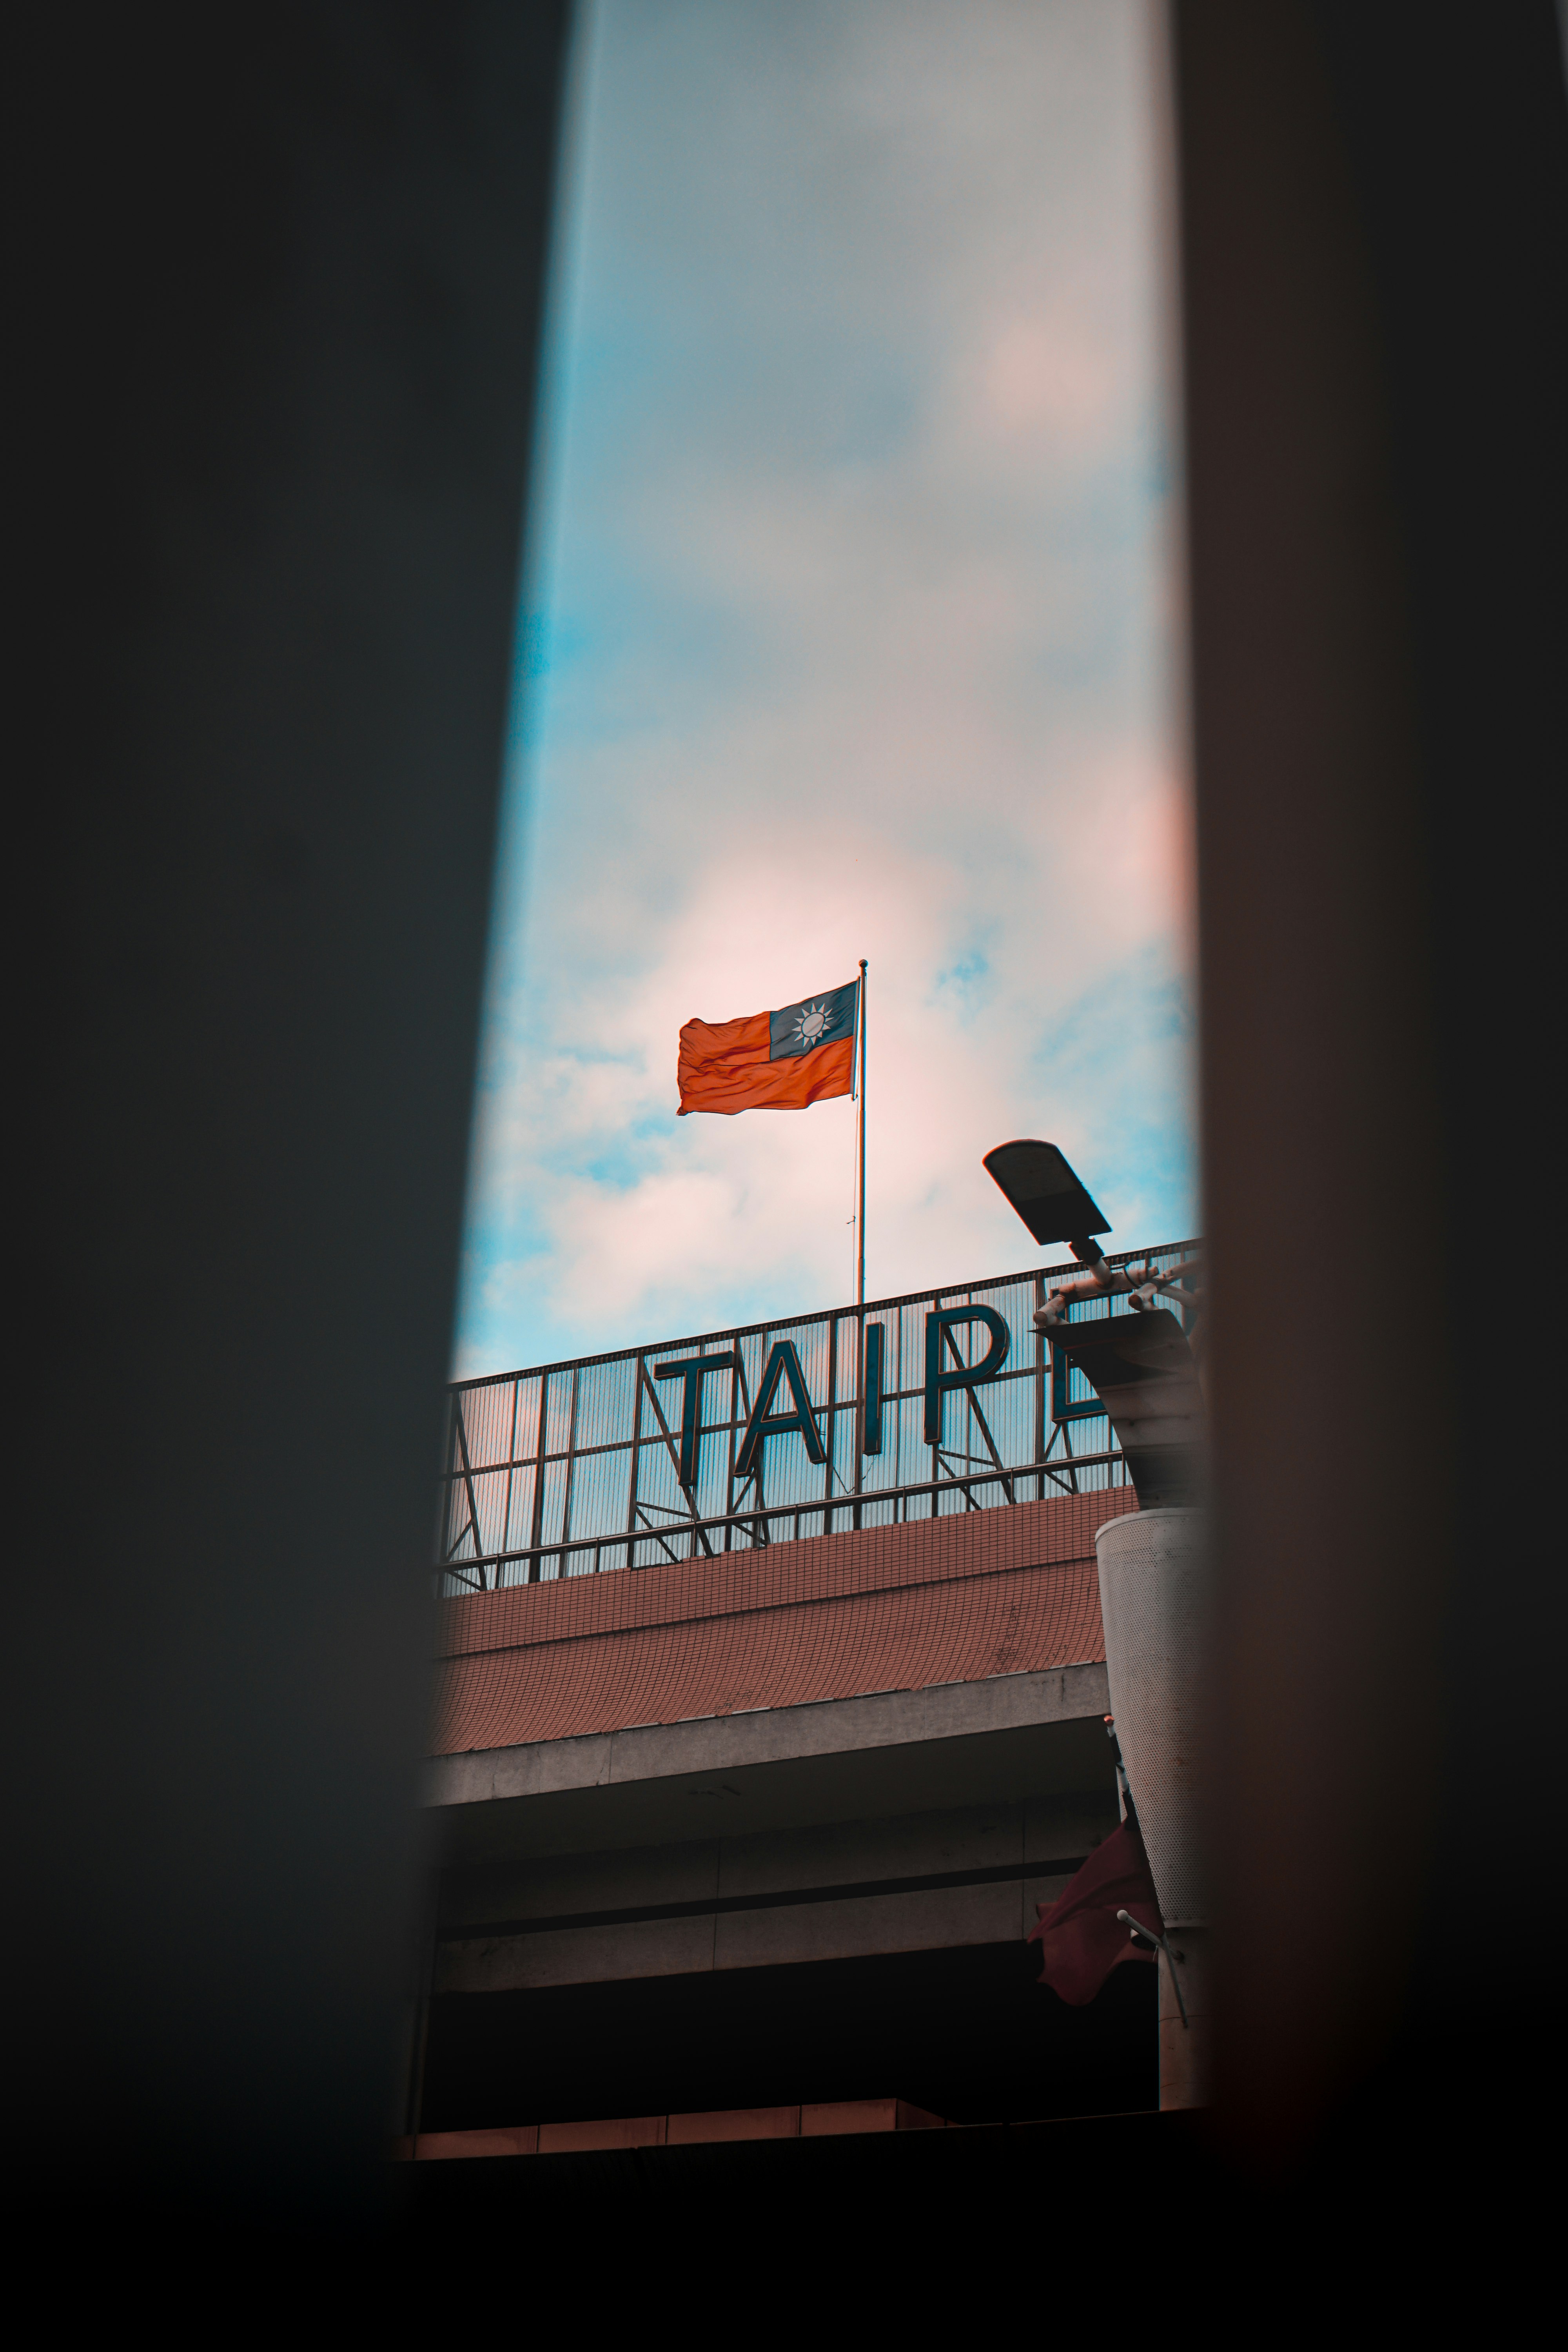 orange and yellow flag on top of building